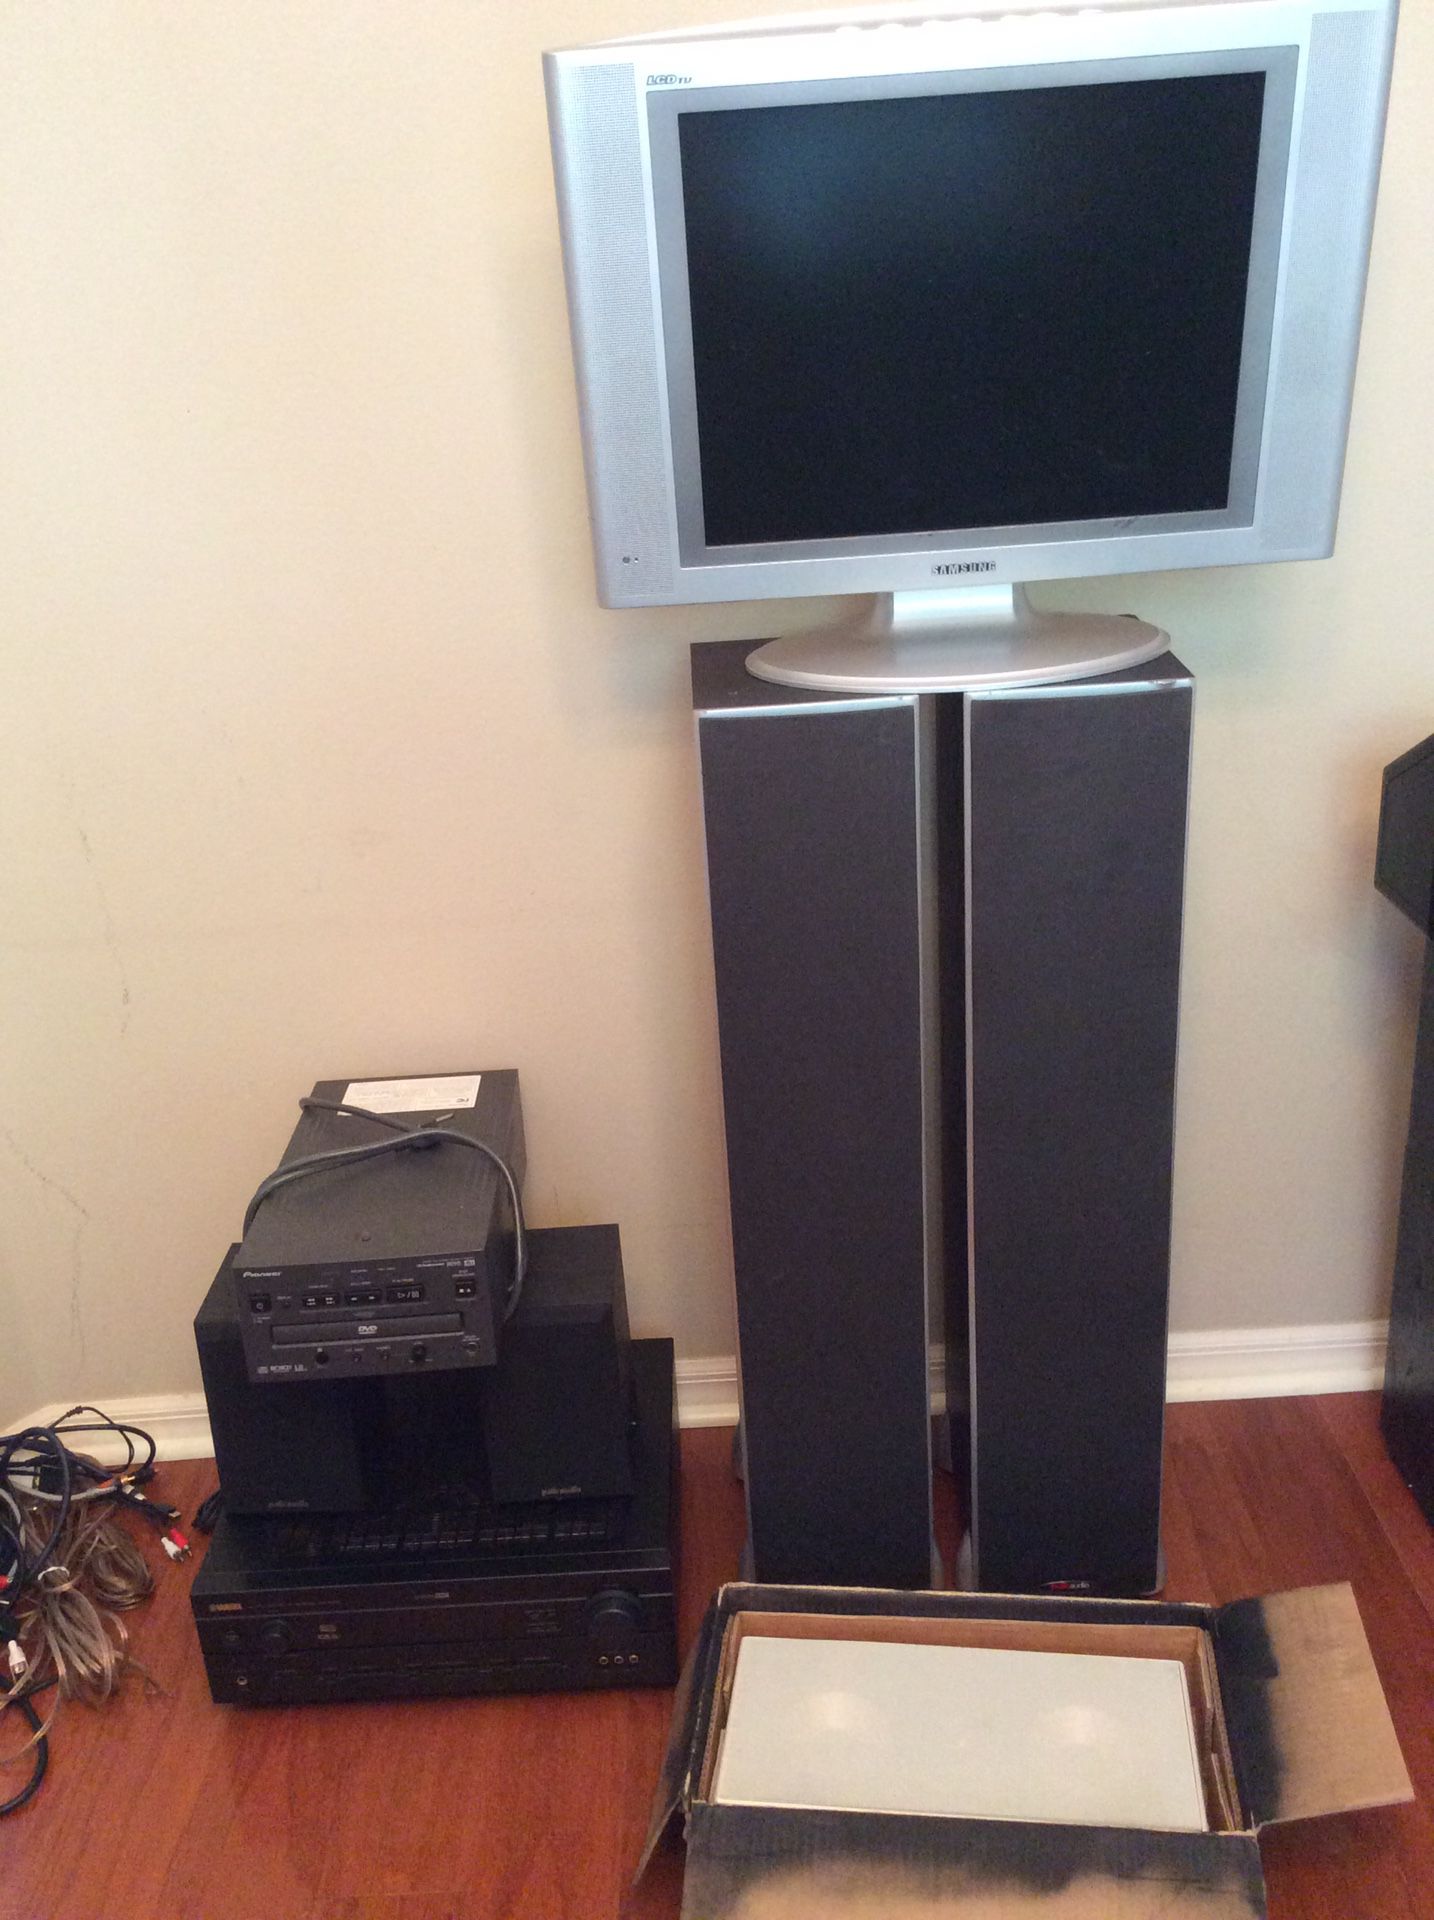 Home theater surround speakers / TV / DVD player / receiver and all cables